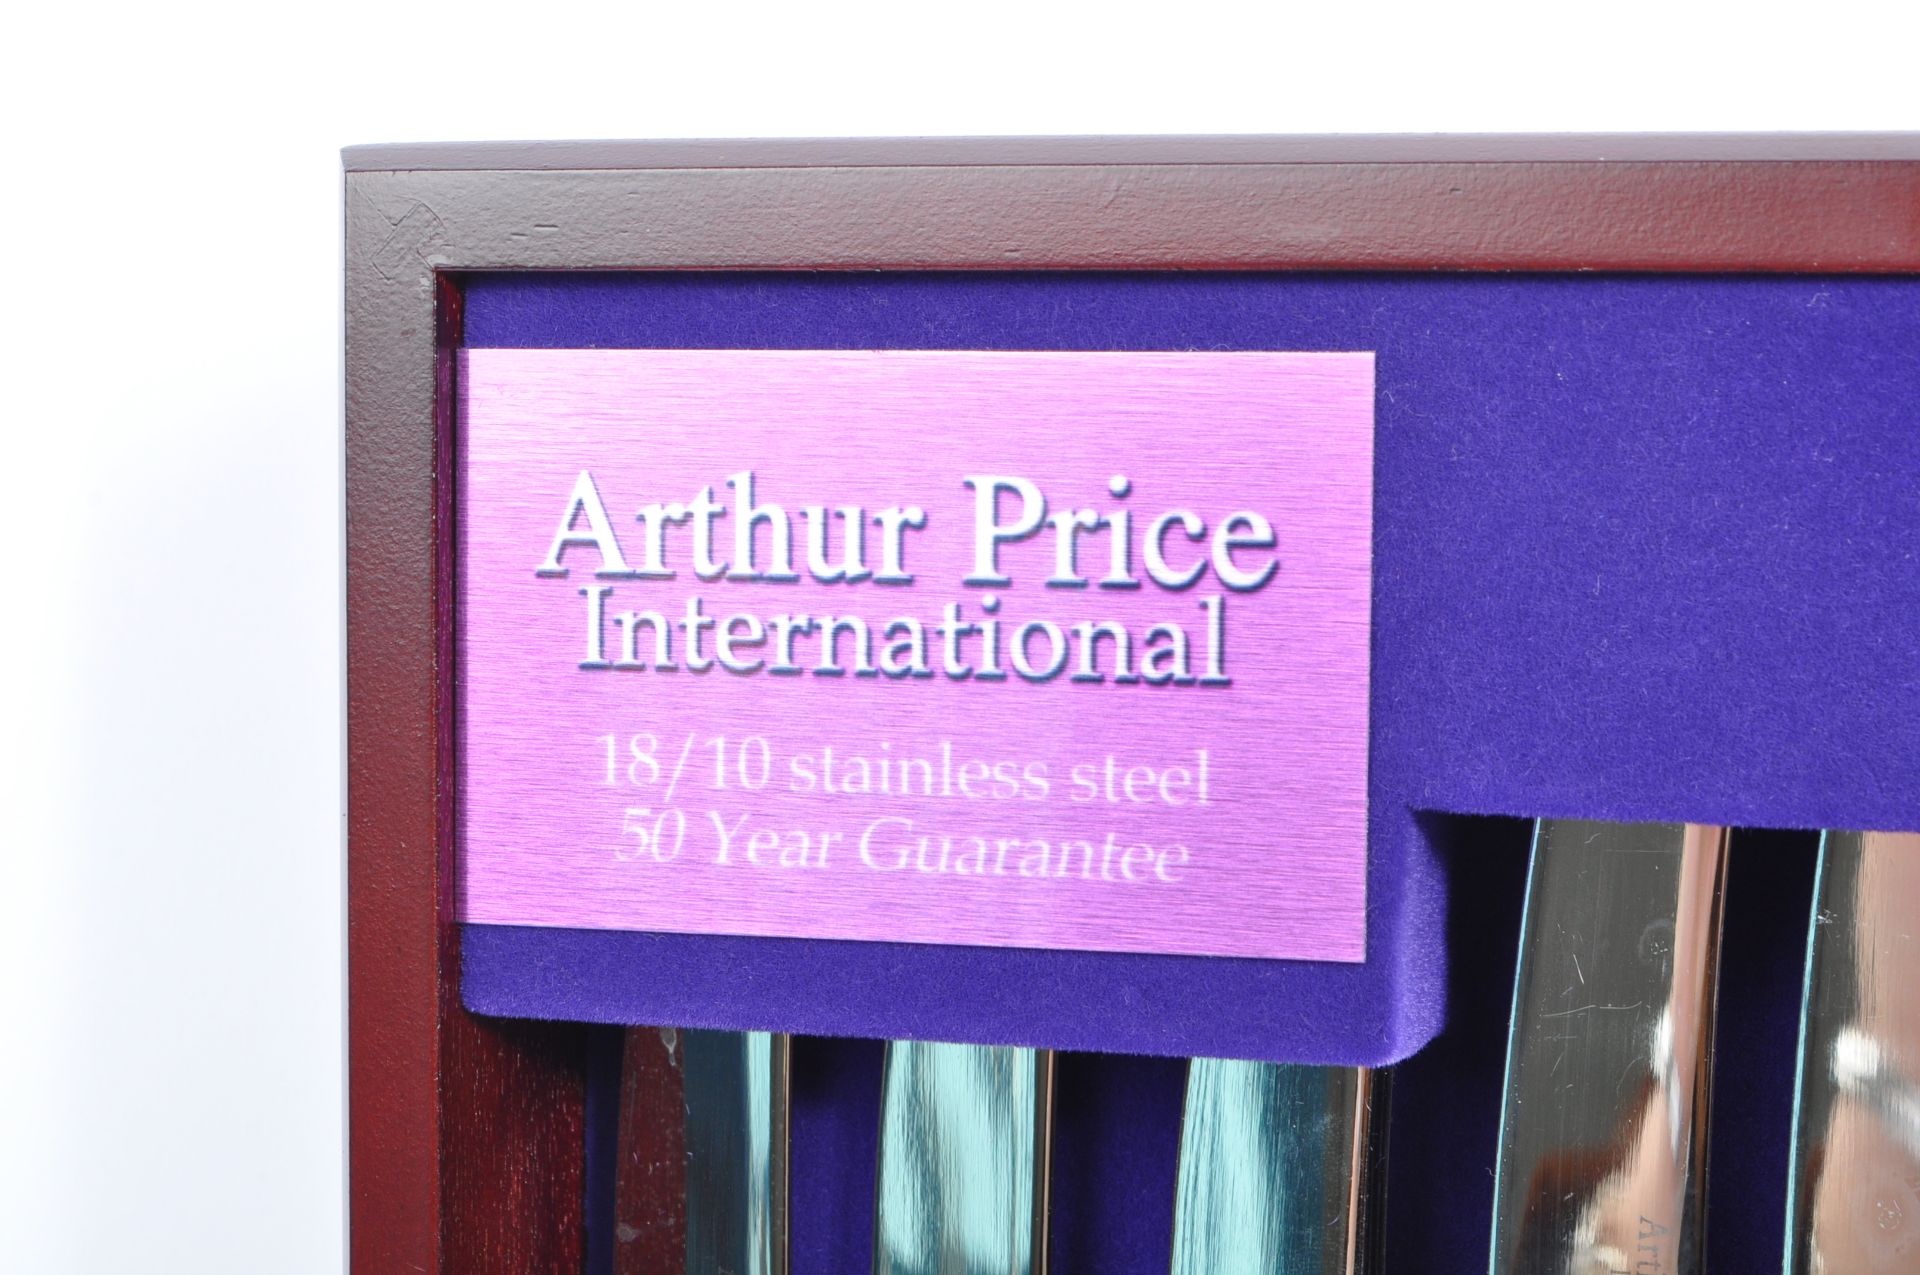 1970S STAINLESS STEEL CUTLERY SET BY ARTHUR PRICE INTERNATIONAL - Image 10 of 11